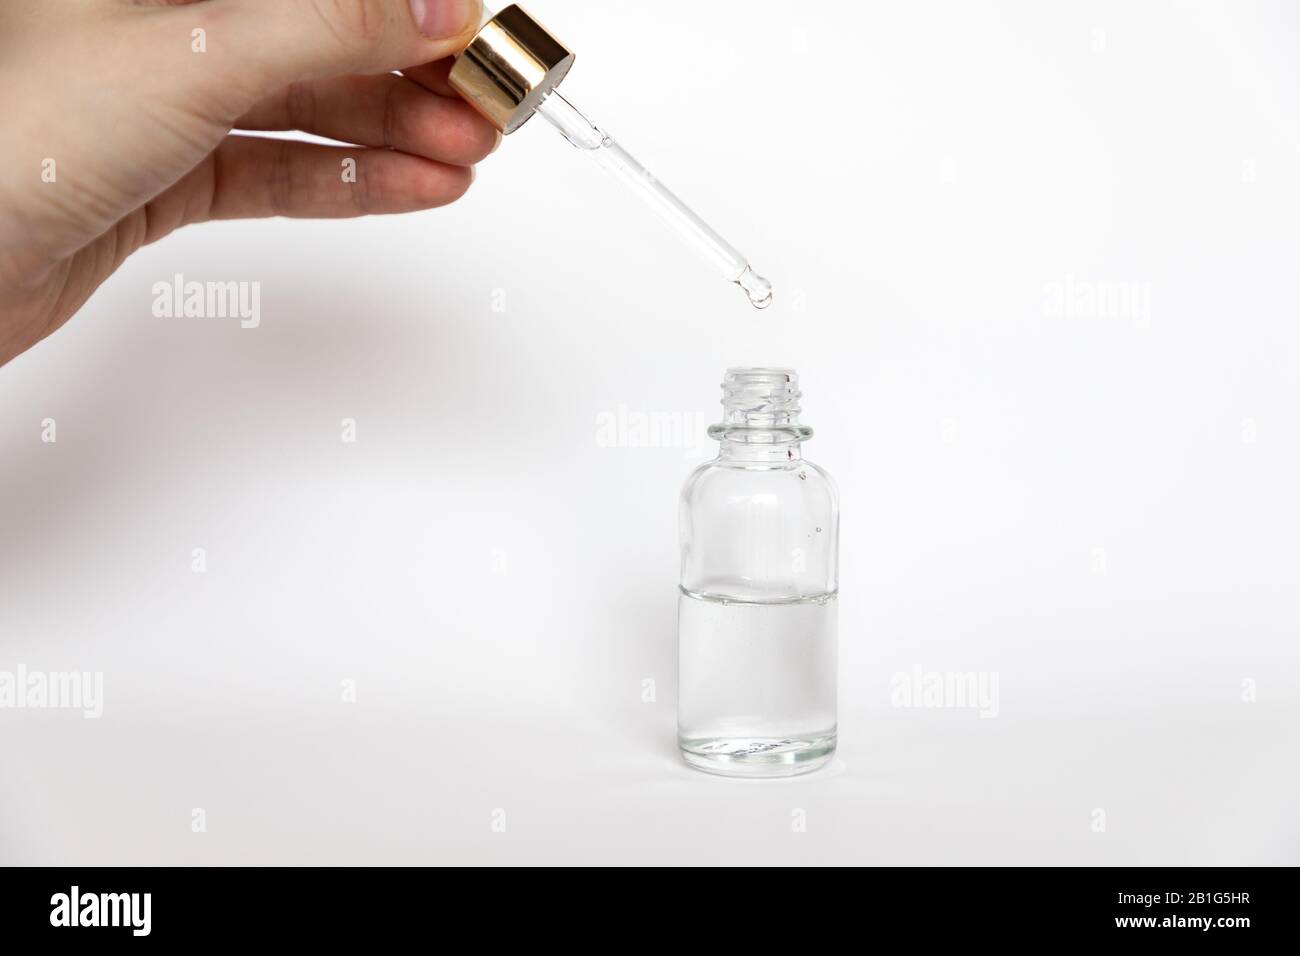 Hyaluronic acid drop falls from cosmetic pipette on white background, Dropper glass Bottle Mock-Up Stock Photo